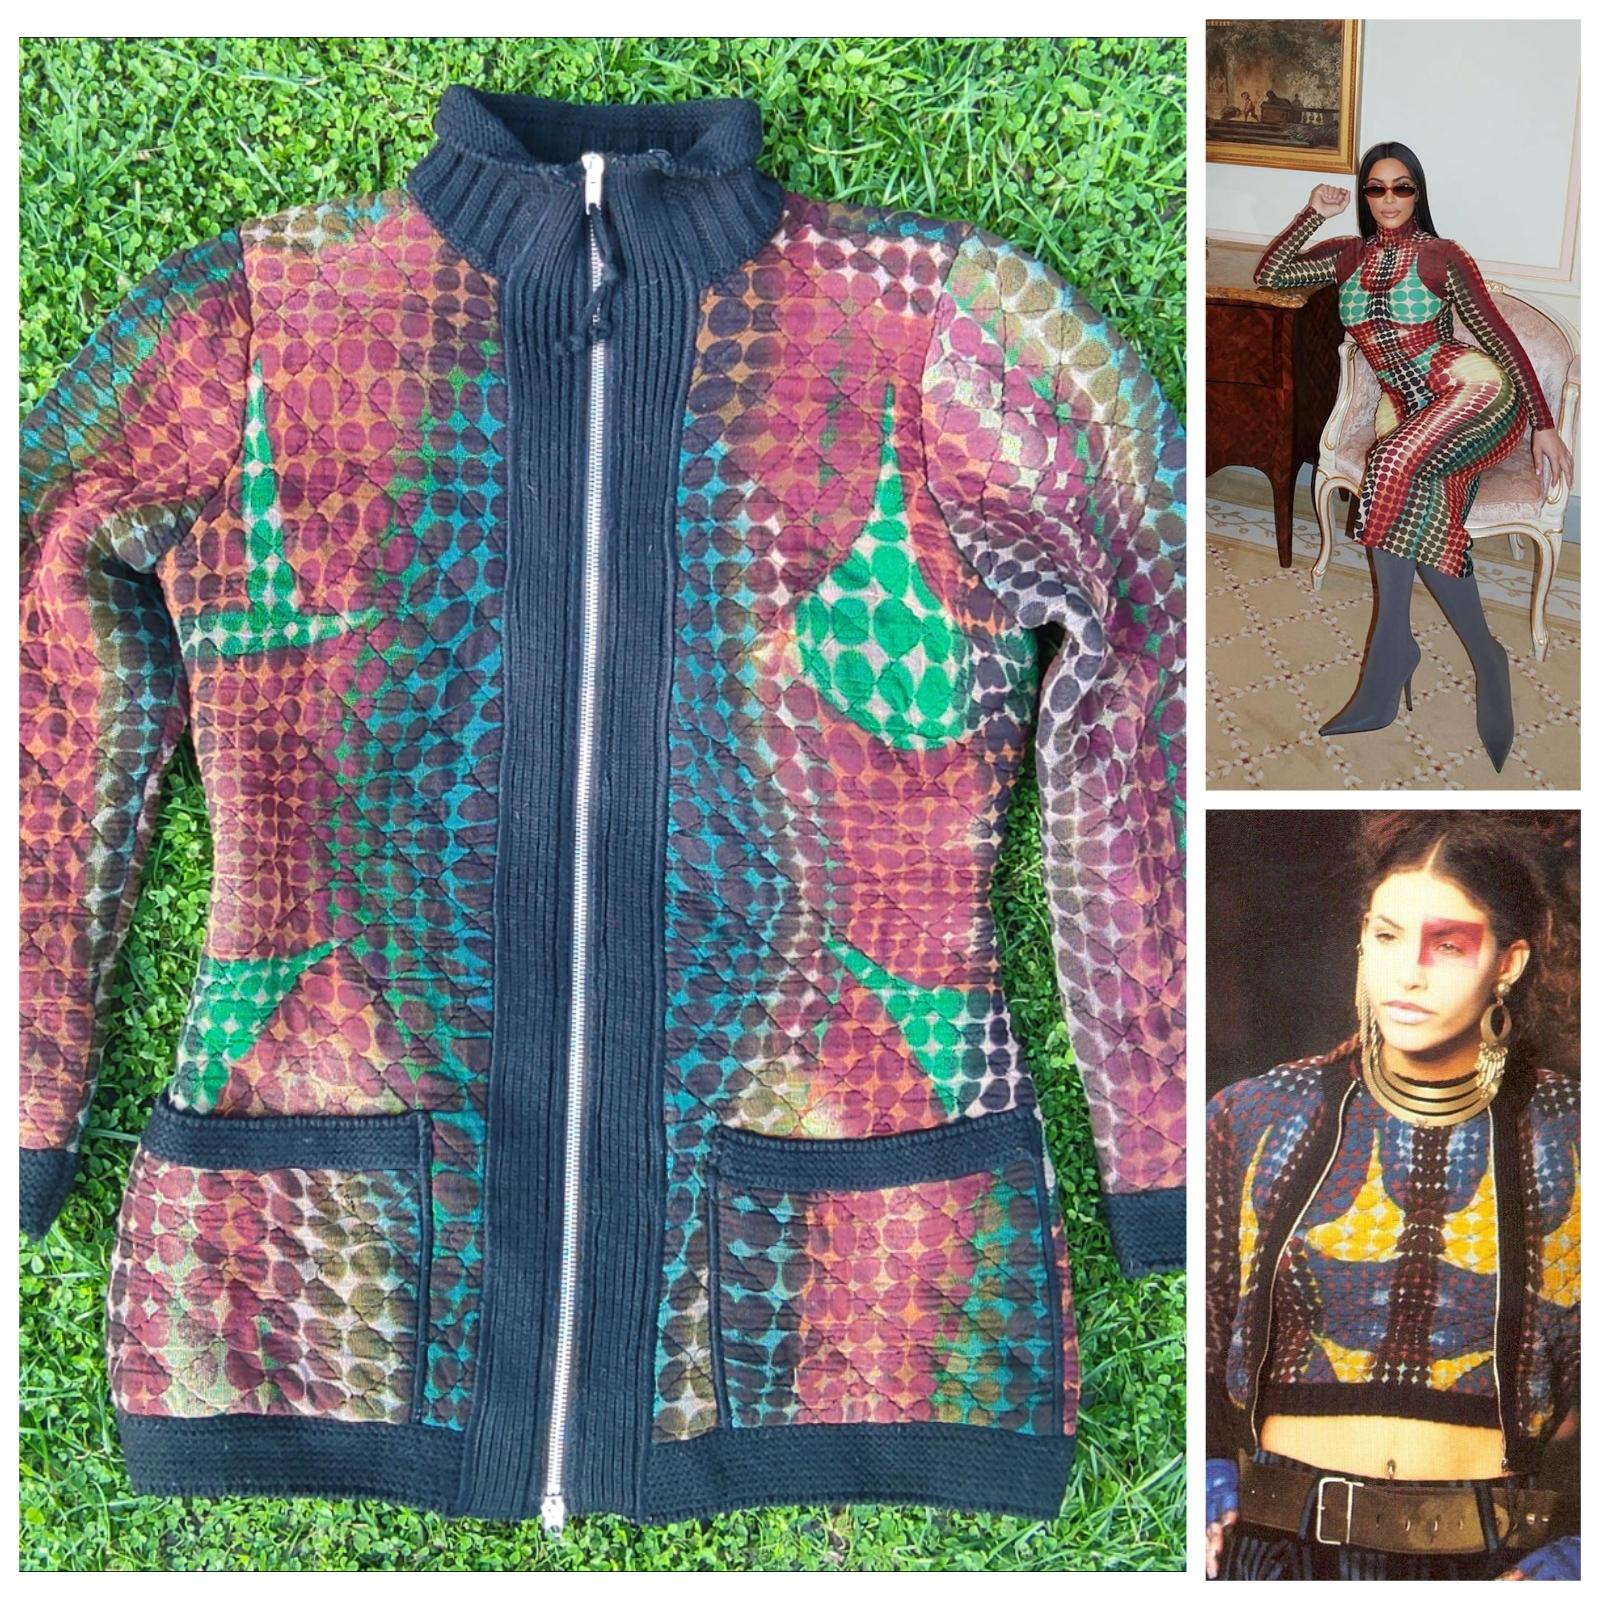 Iconic Cyberbaba dress by Jean Paul Gaultier!
From the Autumn/Winter 1995 Collection!

For sale is an iconic and rare Jean Paul Gaultier Cyberdot Quilted Dress from his Autumn-Winter 1995 collection that has been inspired by the 1979 film 'Mad Max'